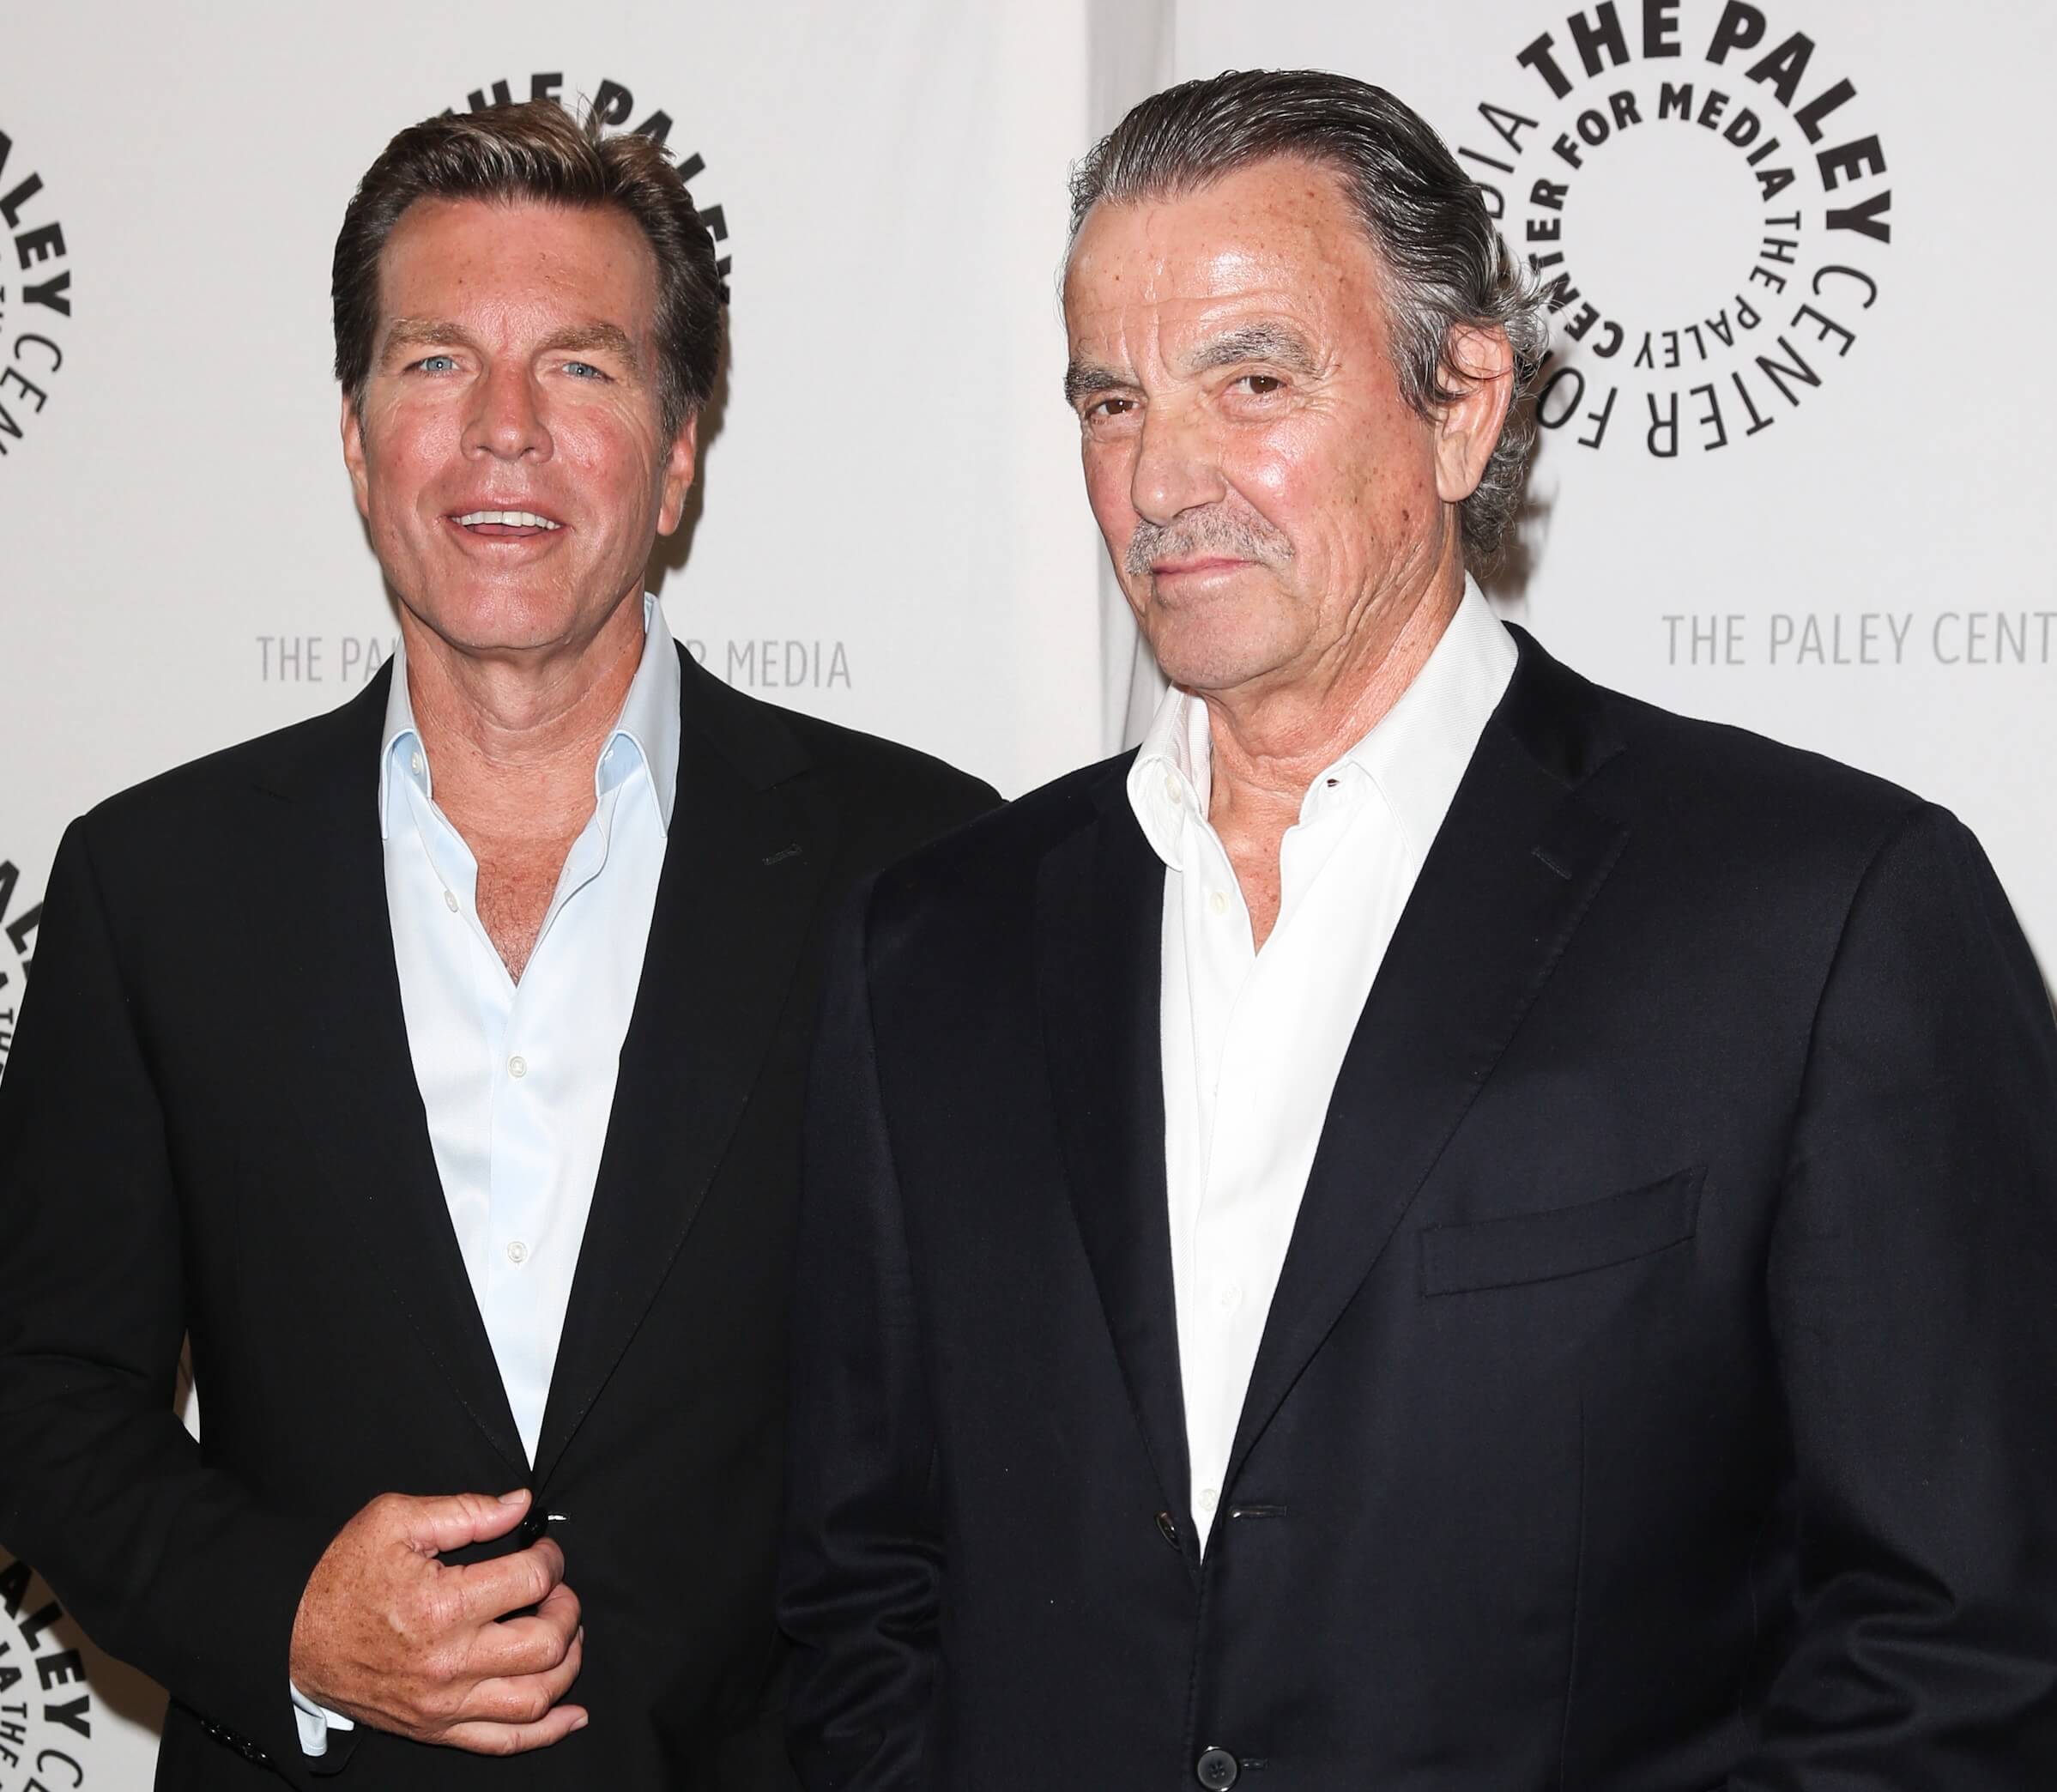 The Young and the Restless stars Peter Bergman and Eric Braeden in black suits;  pose together on the red carpet.